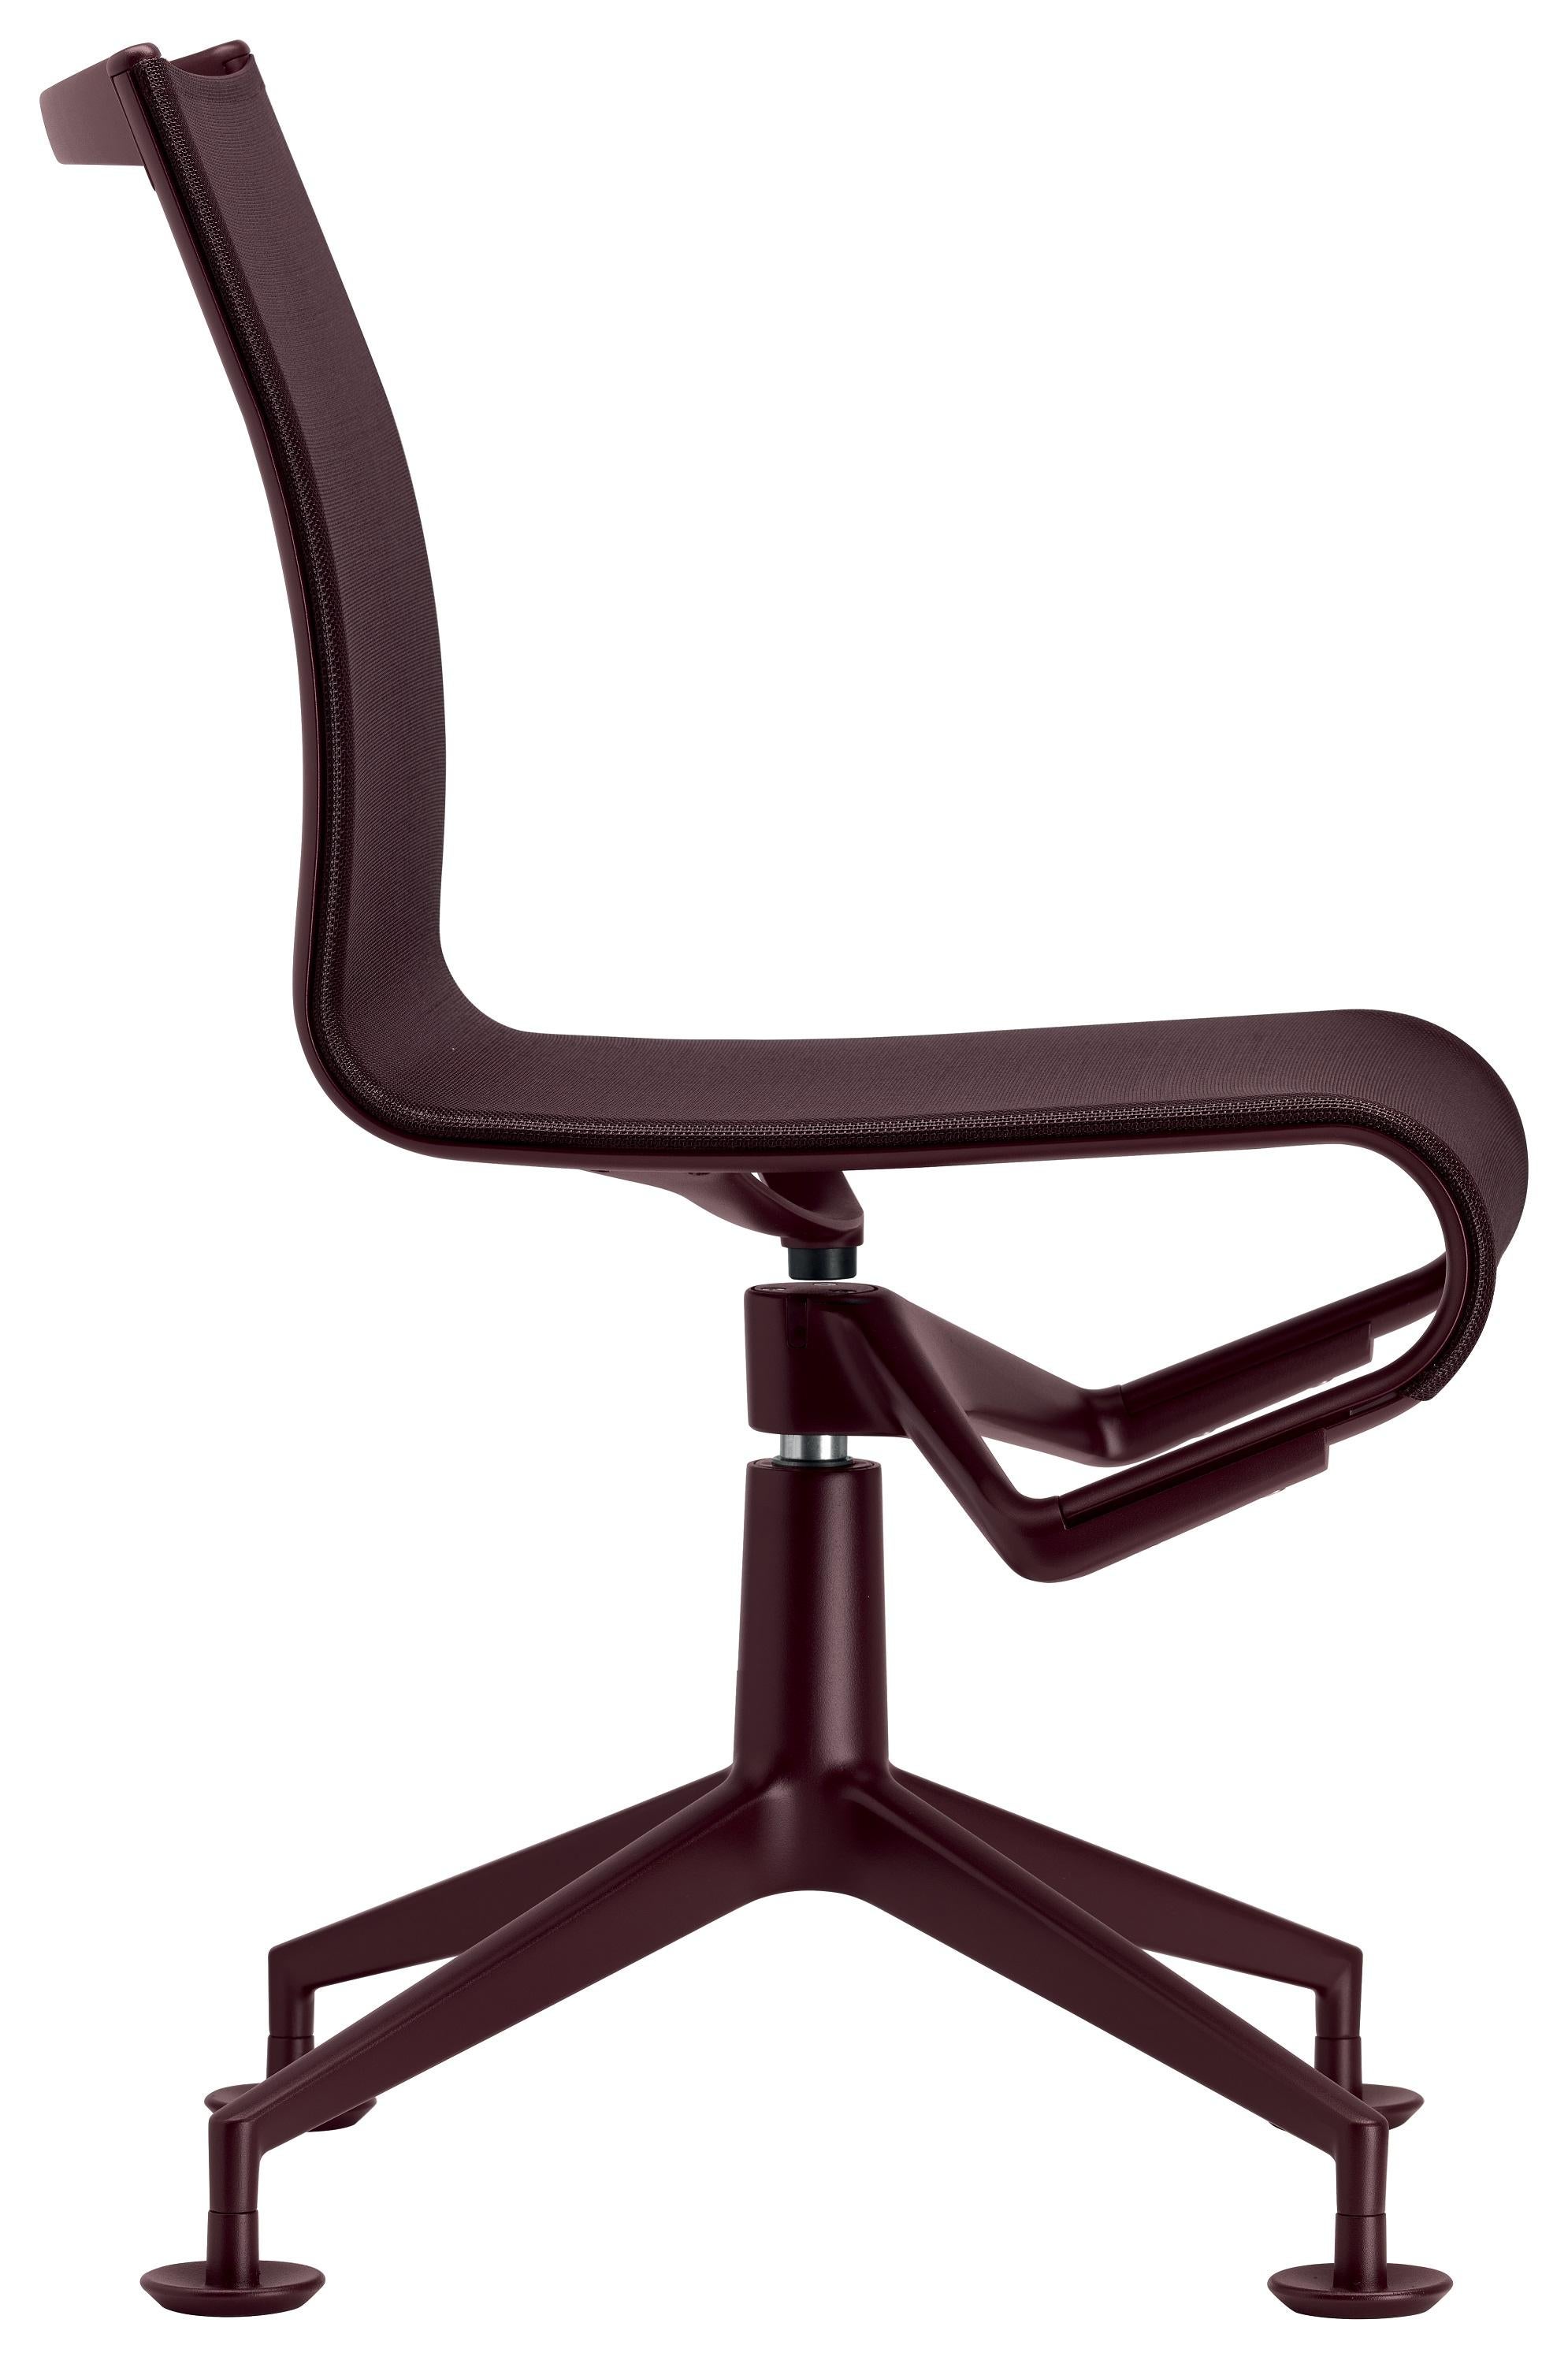 Alias 436 Meetingframe 44 Chair in Aubergine Seat with Lacquered Aluminum Frame by Alberto Meda

Self adjusting swivel chair with 4-star base with glides. Structure made of extruded aluminium profile and die-cast aluminium elements. Seat and back